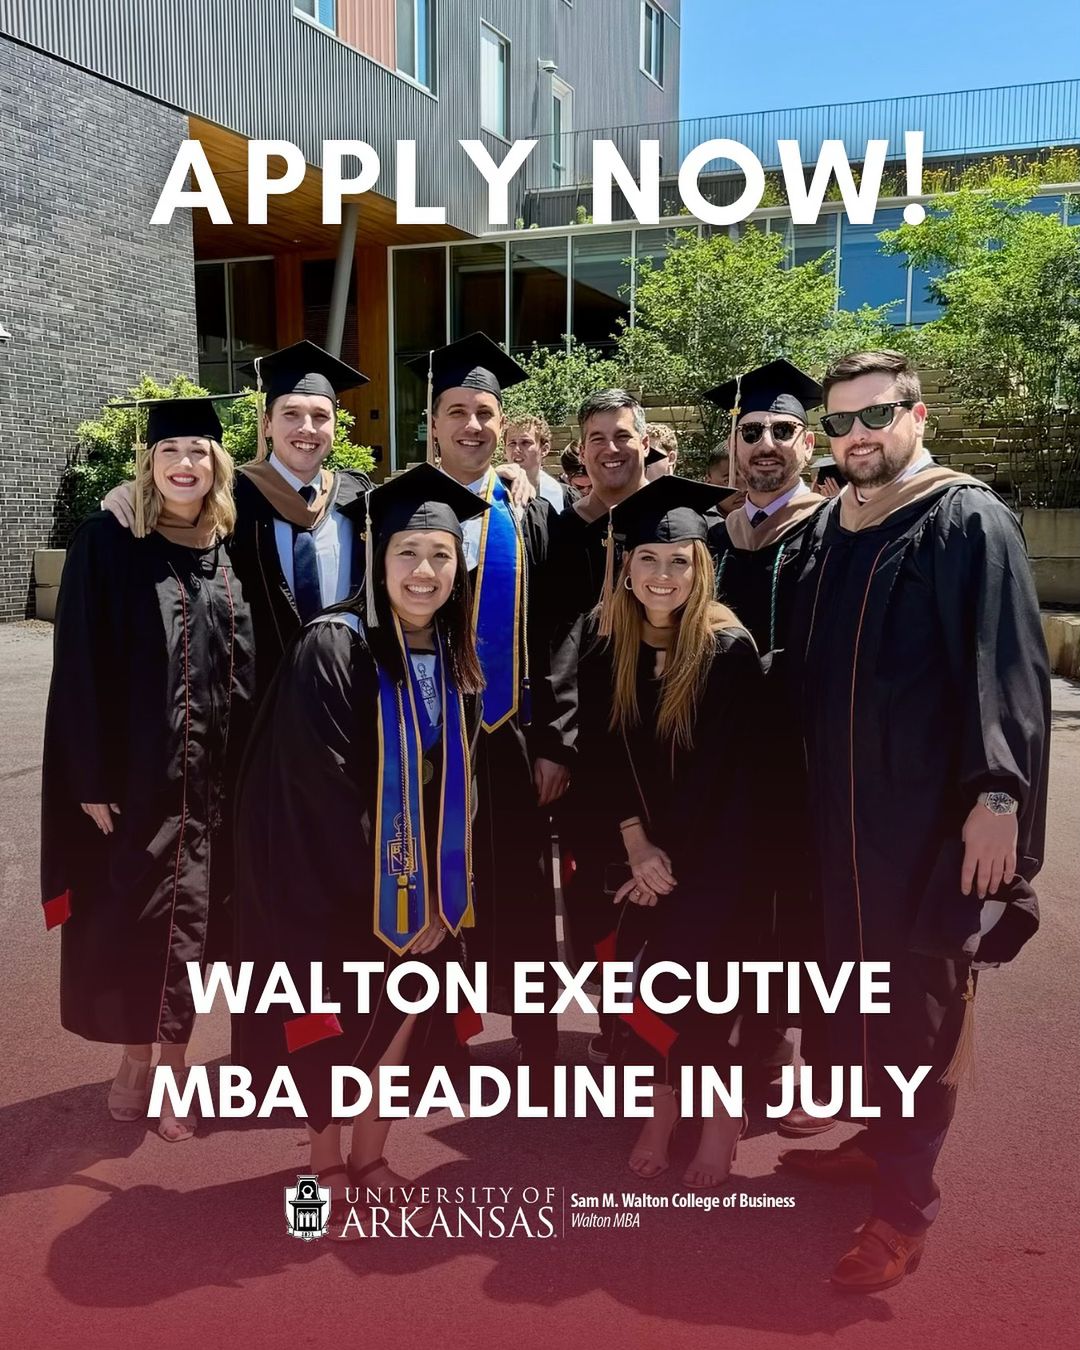 Time is running out! ⏳ Don’t miss the Walton Executive MBA application deadli...